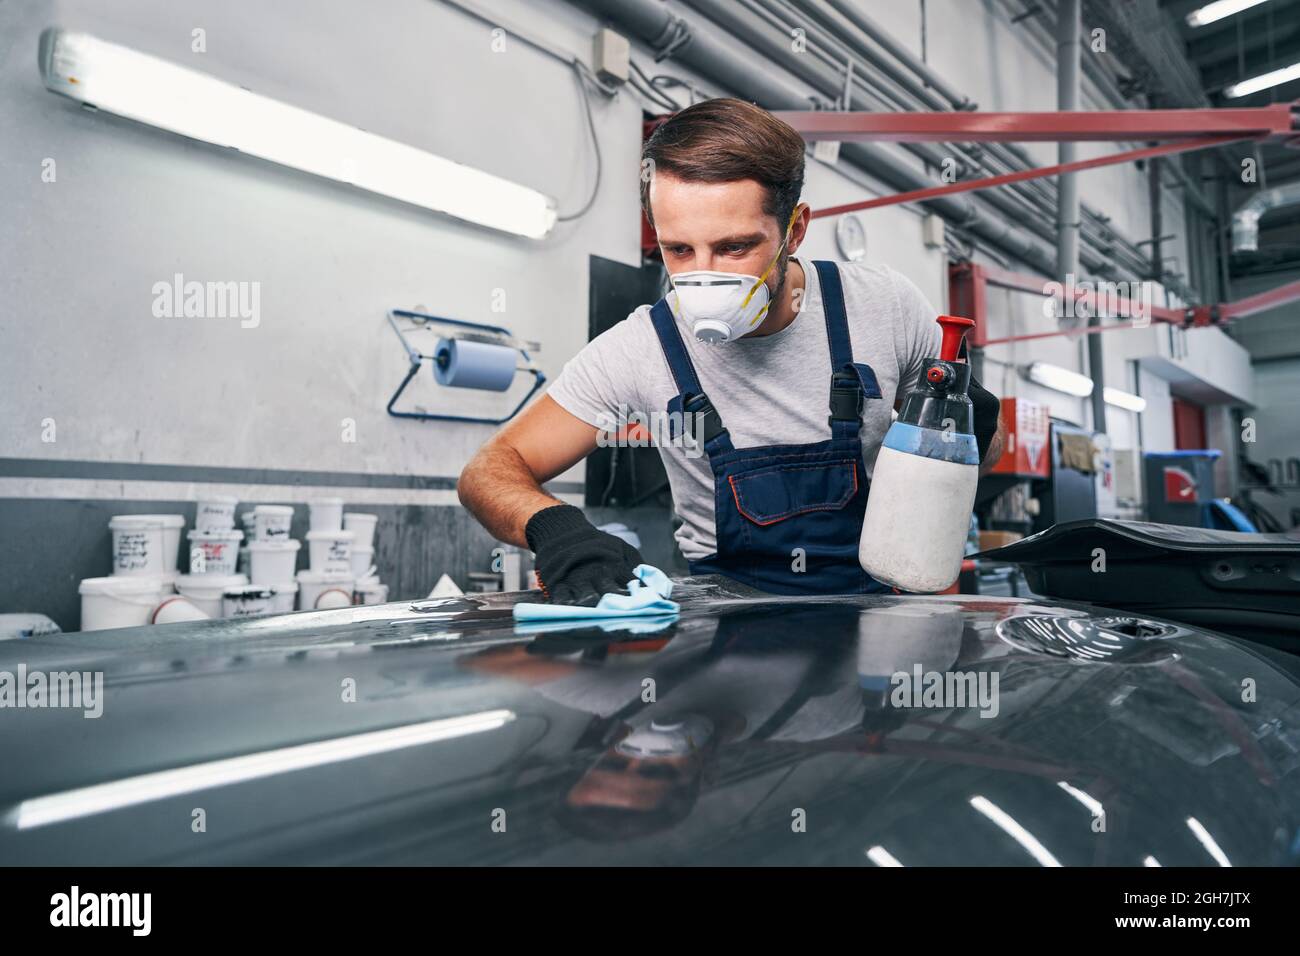 Car repairman wiping car surface with cloth Stock Photo